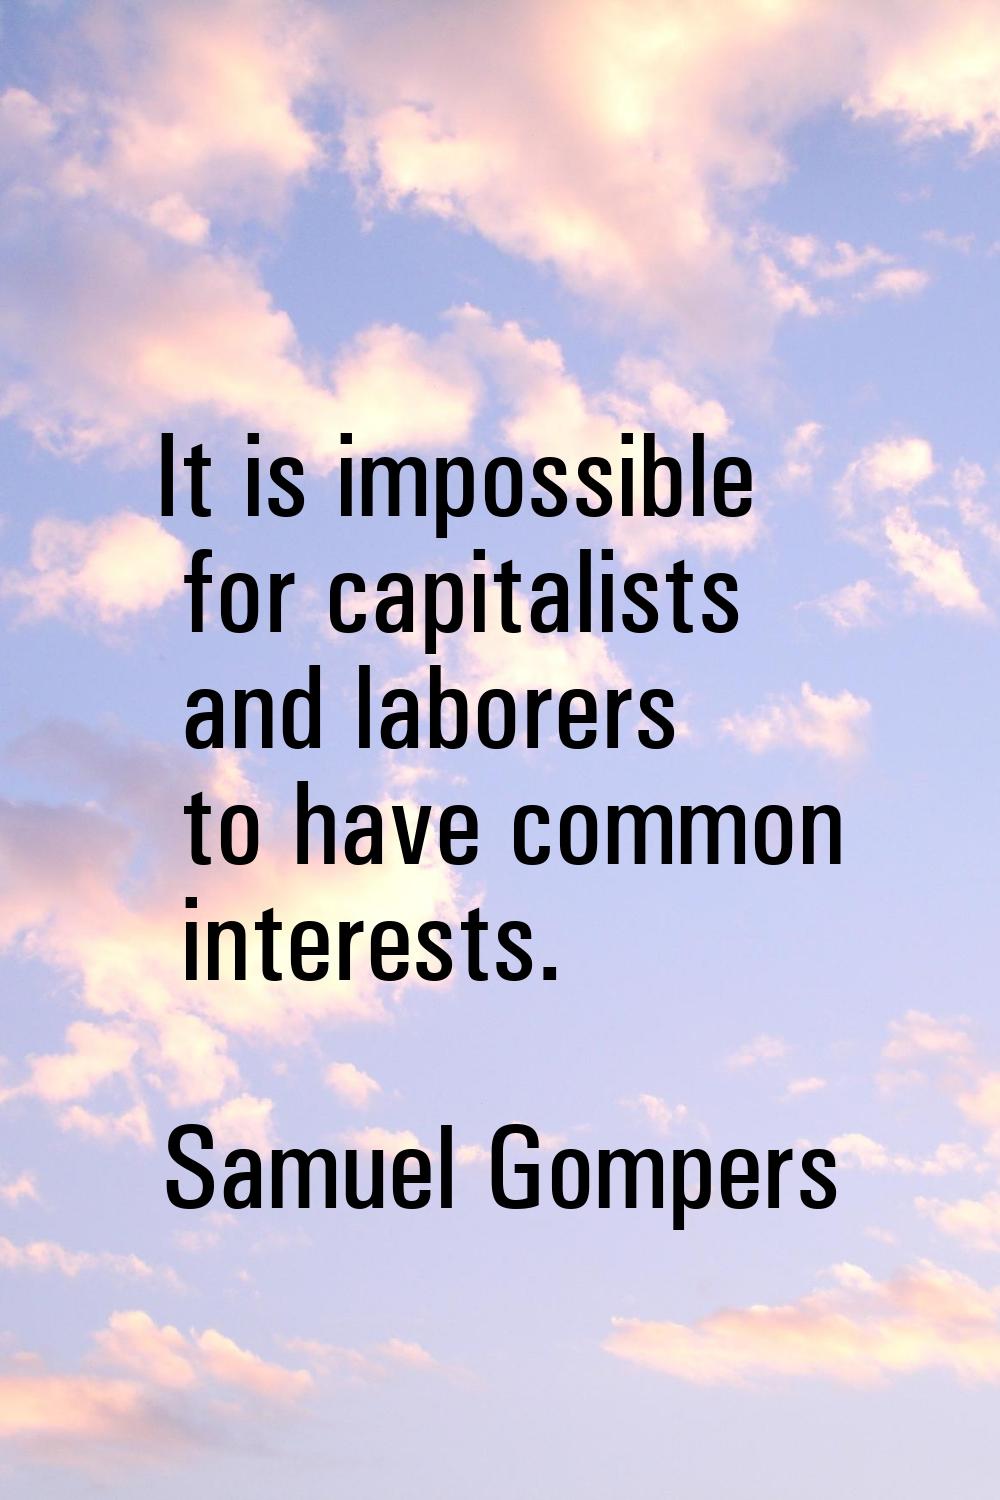 It is impossible for capitalists and laborers to have common interests.